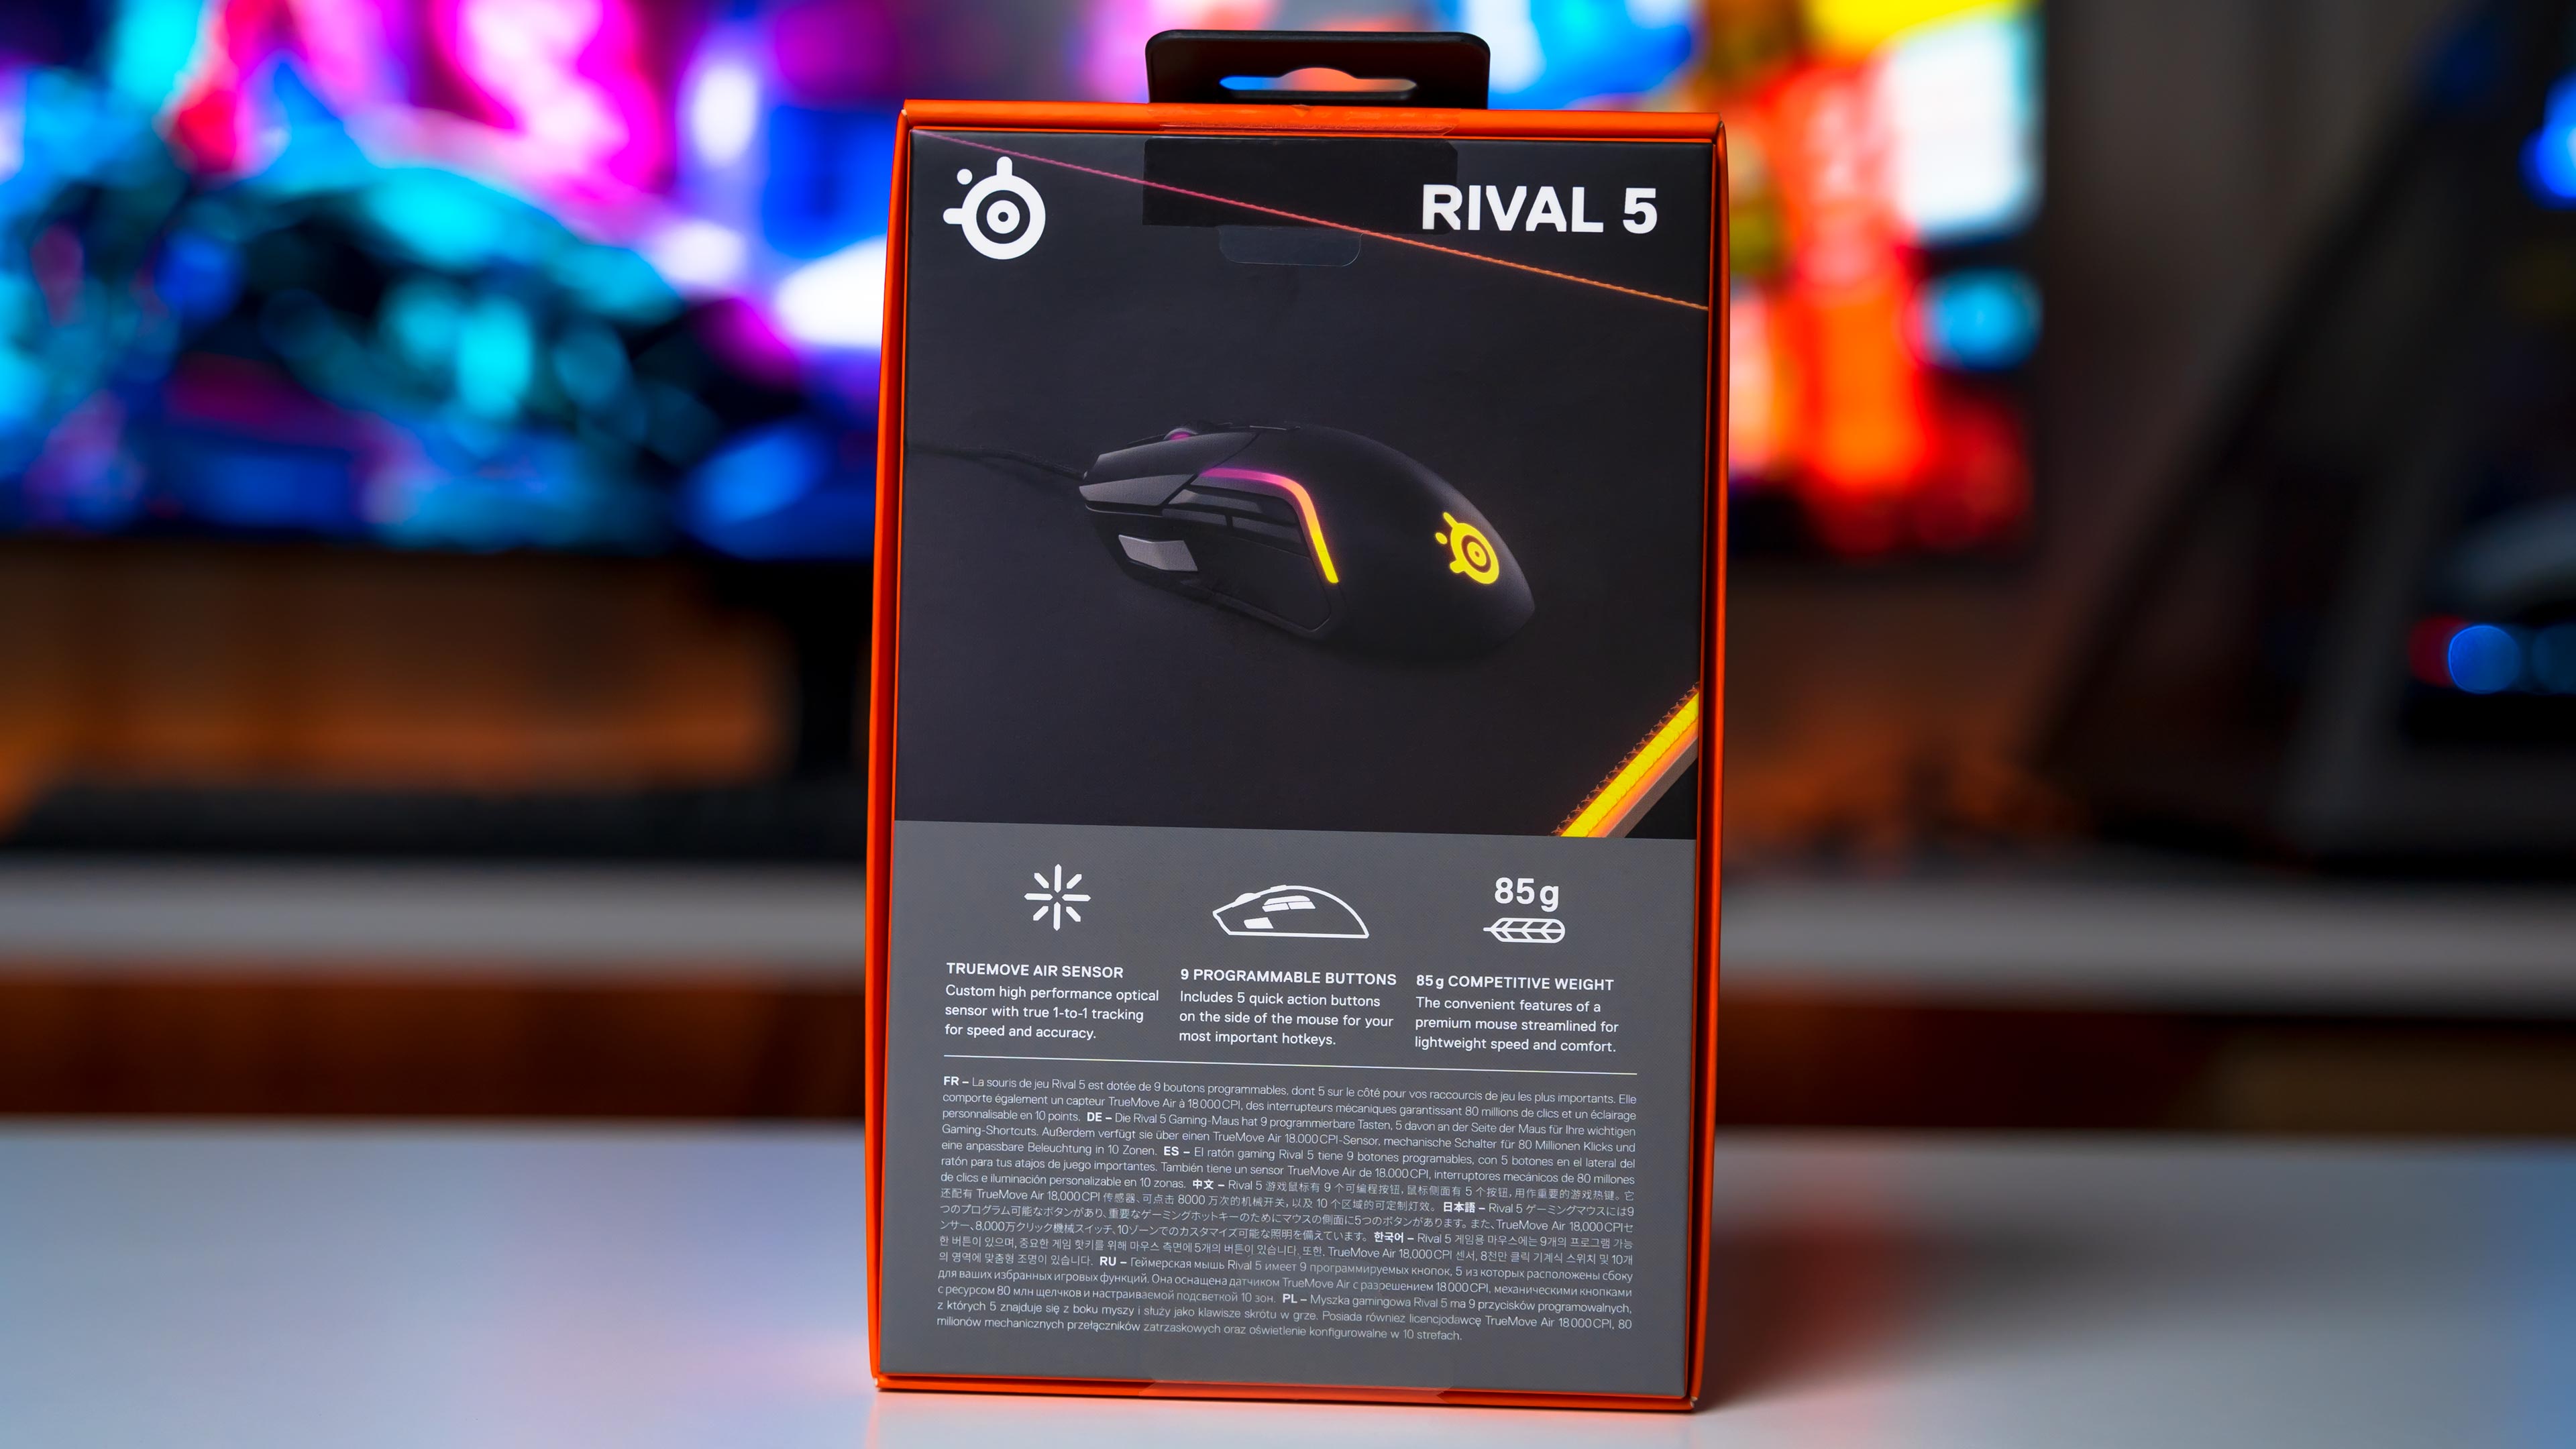 Steelseries Rival 5 Box (7)